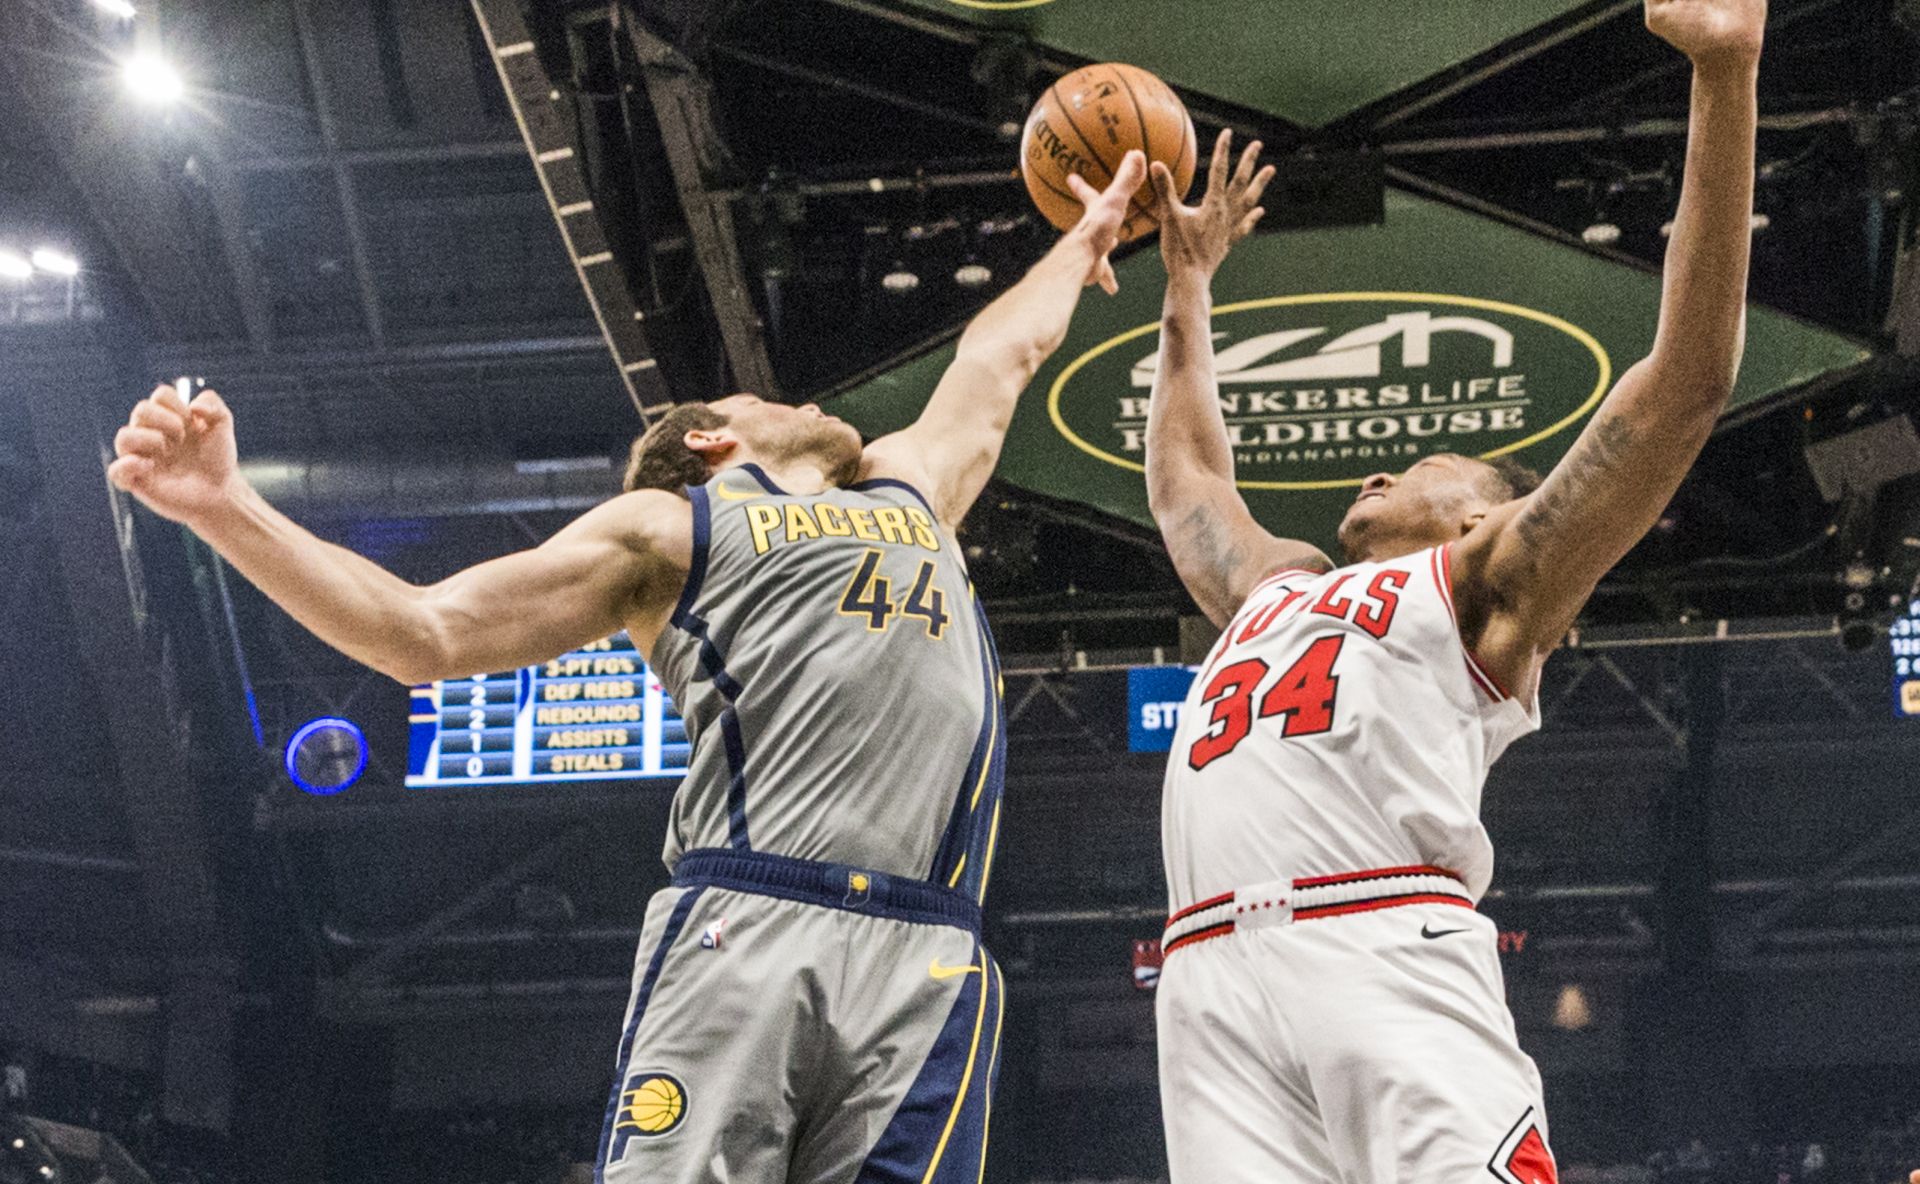 epa07209157 Chicago Bulls forward Wendell Carter Jr. (R) and Indiana Pacers forward Bojan Bogdanovic of Croatia (L) battle for a rebound during the NBA game between the Chicago Bulls and the Indiana Pacers at Bankers Life Fieldhouse in Indianapolis, Indiana, USA, 04 December 2018.  EPA/TANNEN MAURY  SHUTTERSTOCK OUT